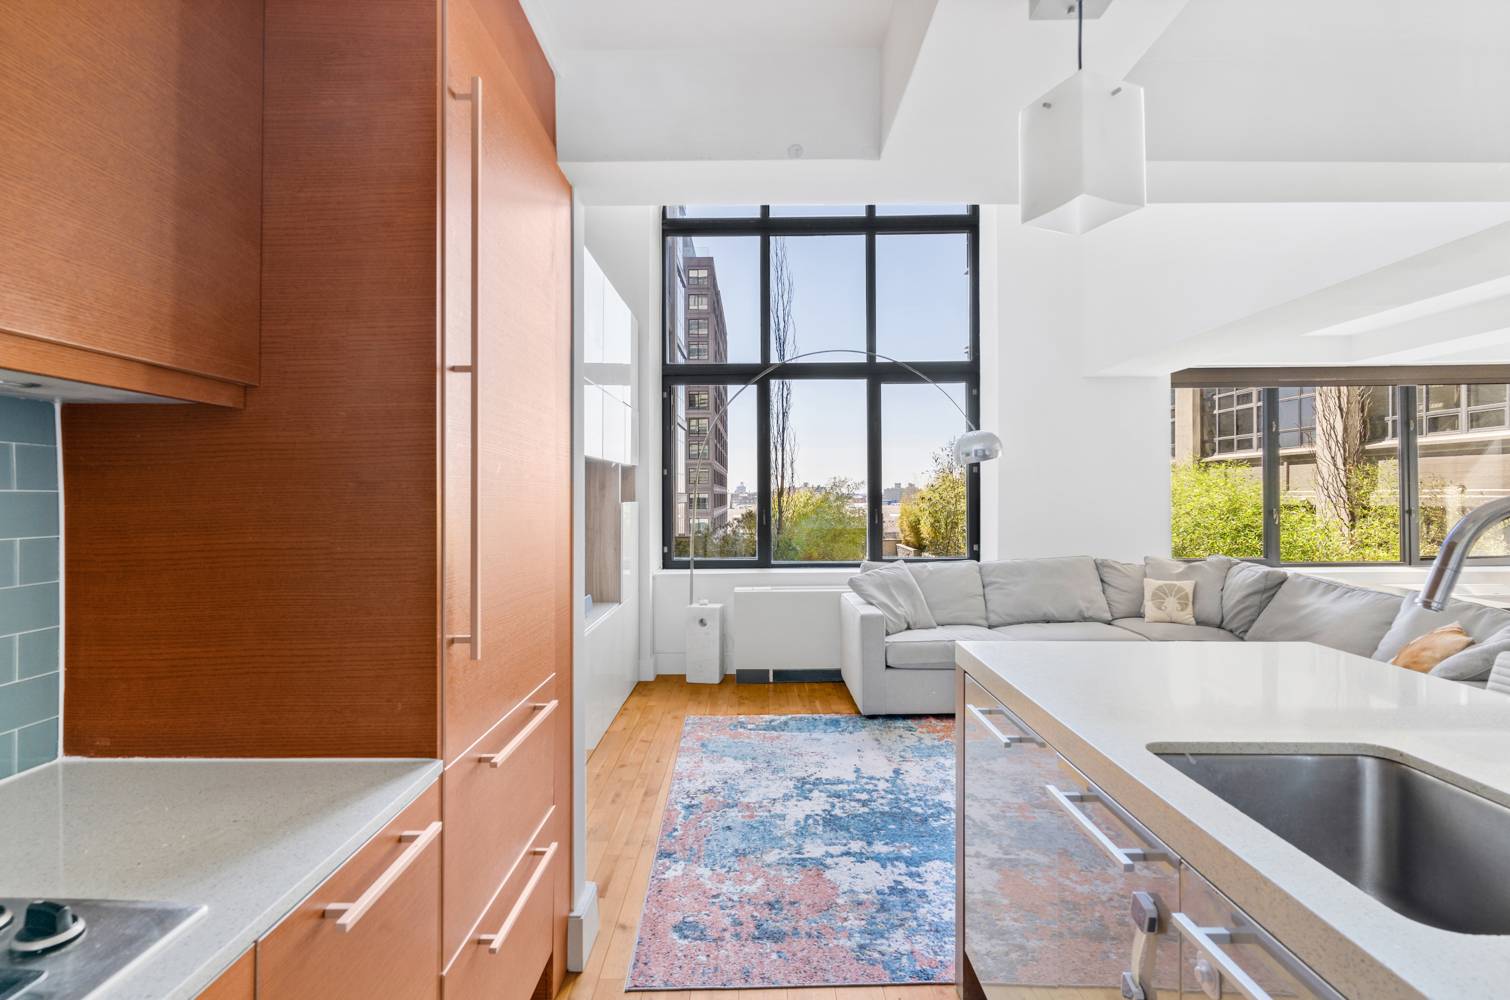 Spacious One Bedroom Duplex in FULL SERVICE LUXURY Brooklyn Heights Condo This full service converted warehouse loft with high end finishes is an airy getaway in historic Brooklyn Heights.